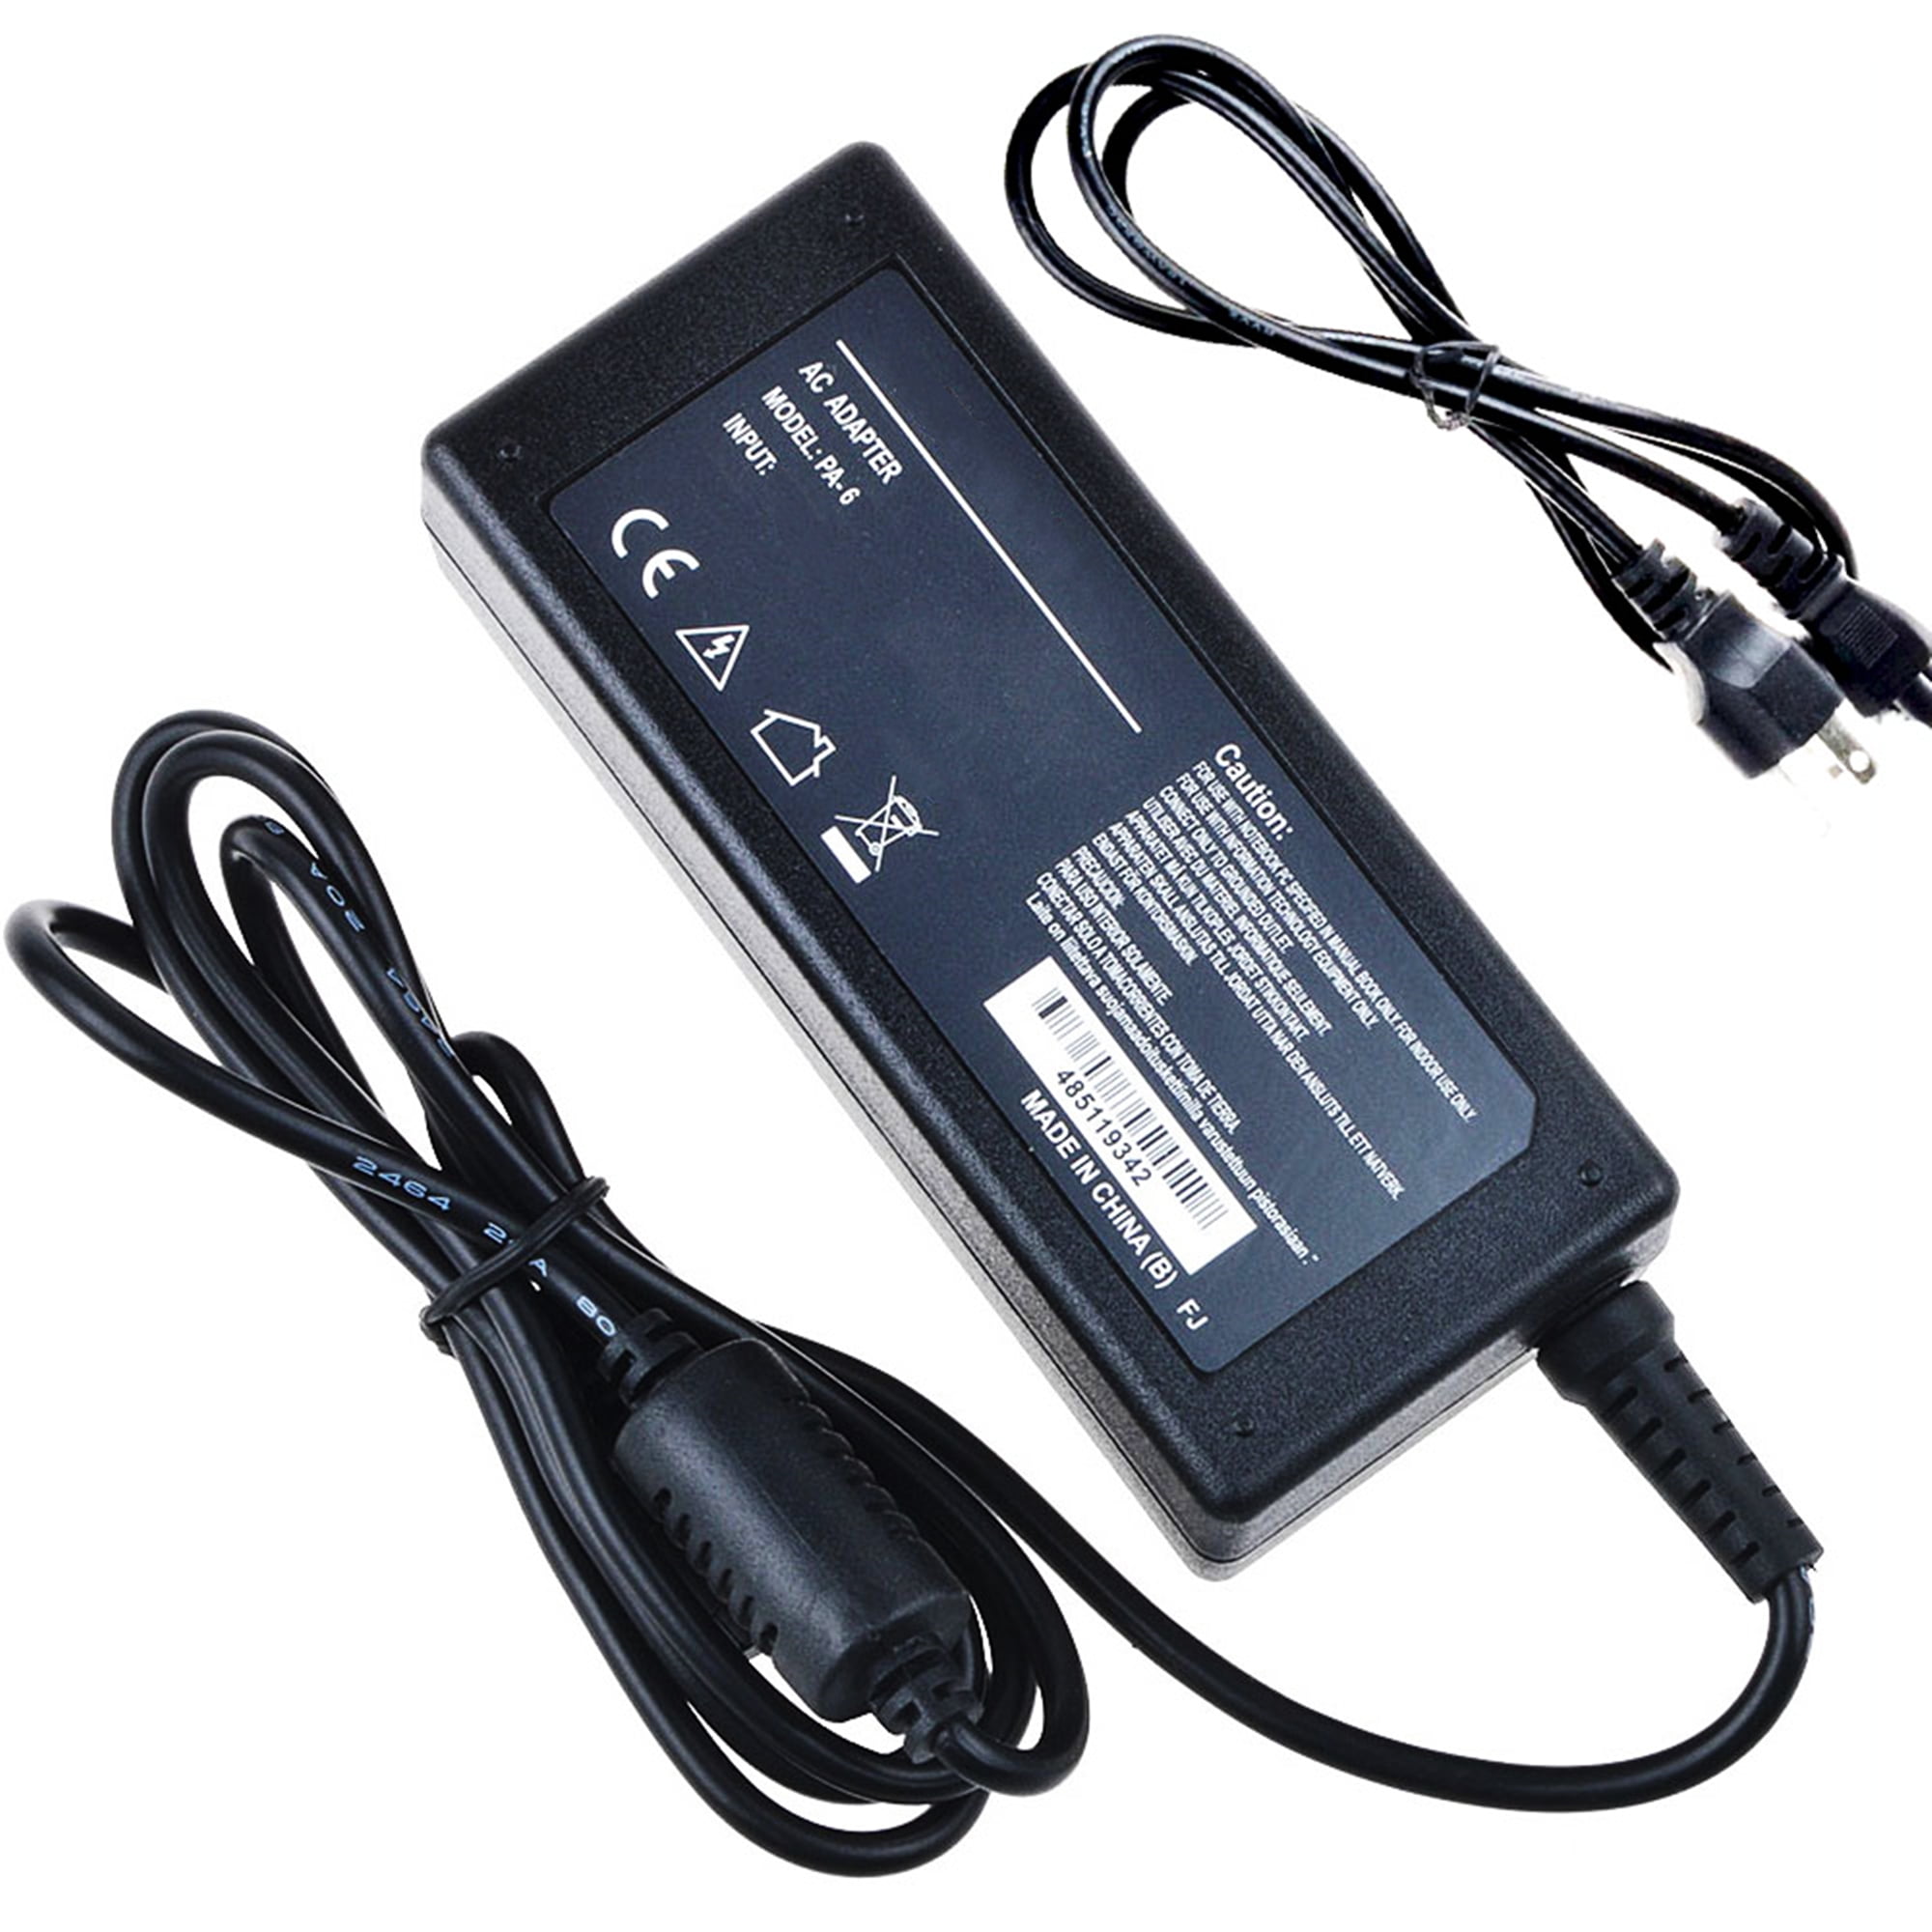 NEW AC Adapter For Promethean ActivBoard 300 Pro DC Power Supply Battery Charger 